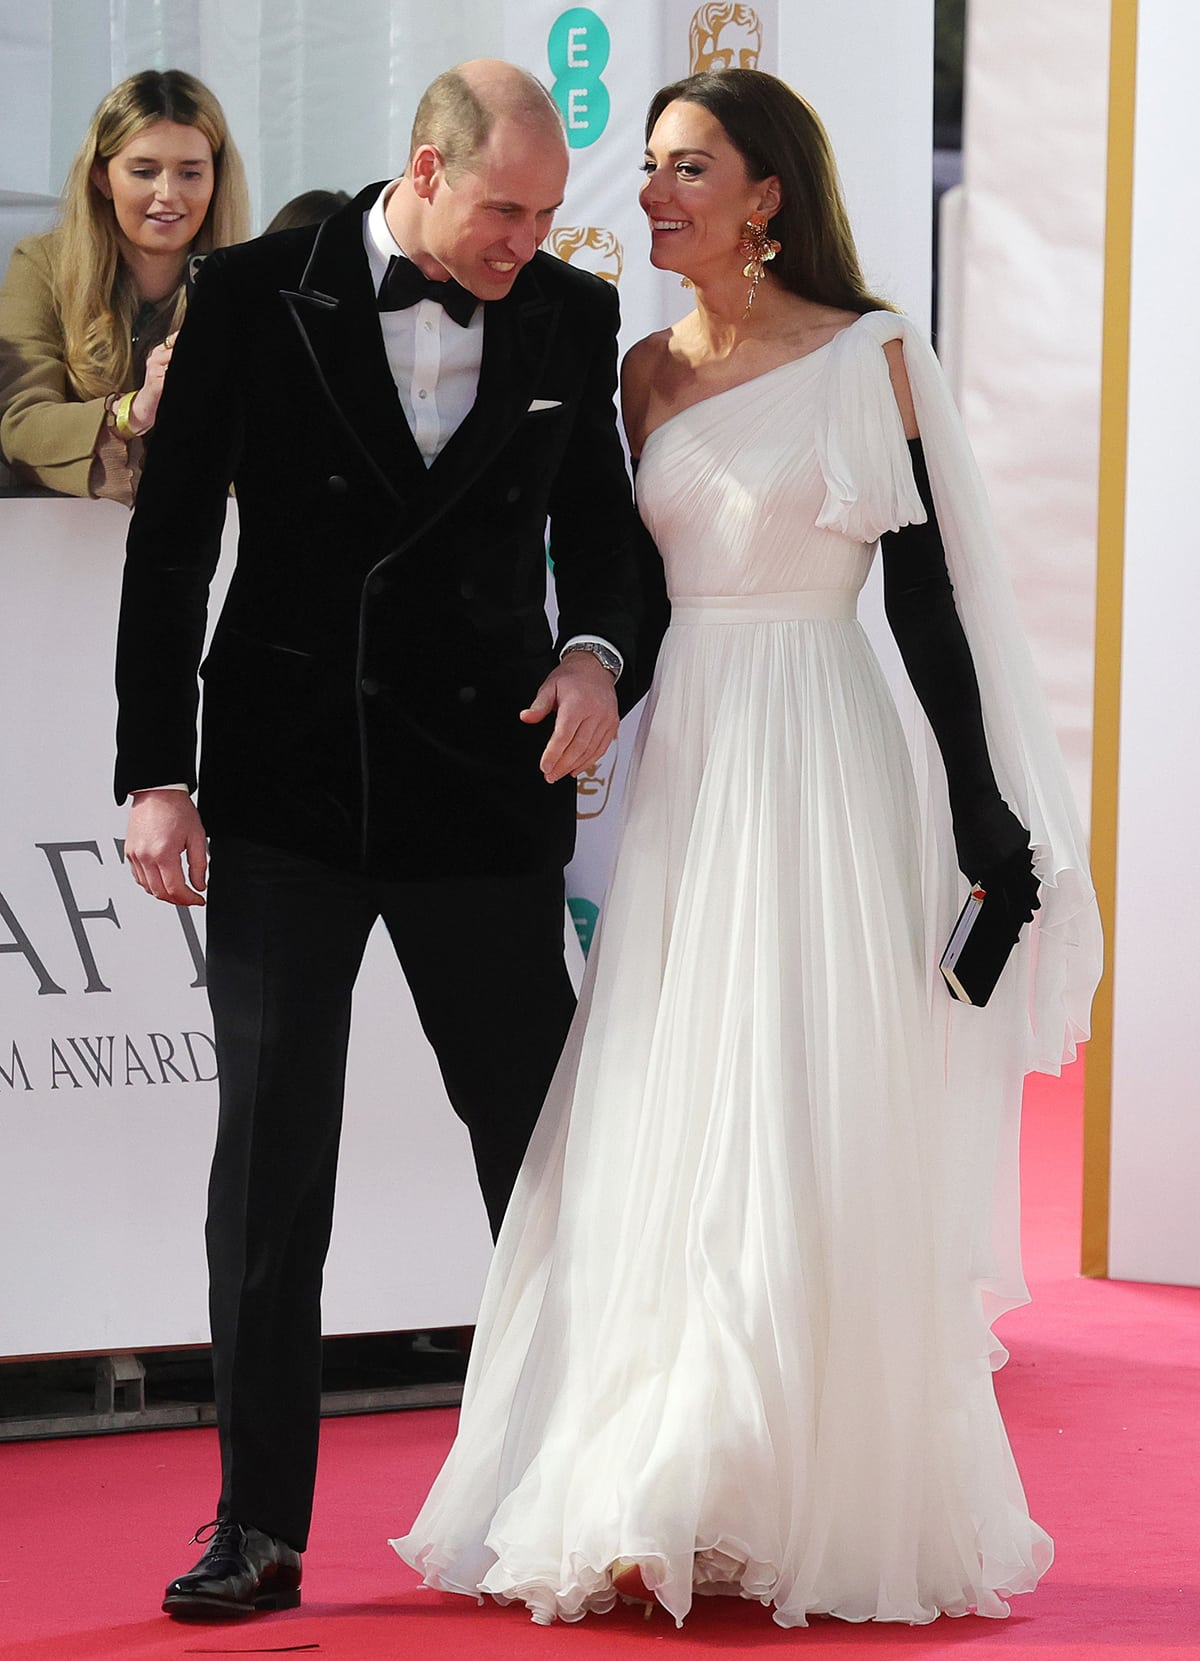 The Prince and Princess of Wales display affection towards each other on the BAFTAs red carpet on February 19, 2023